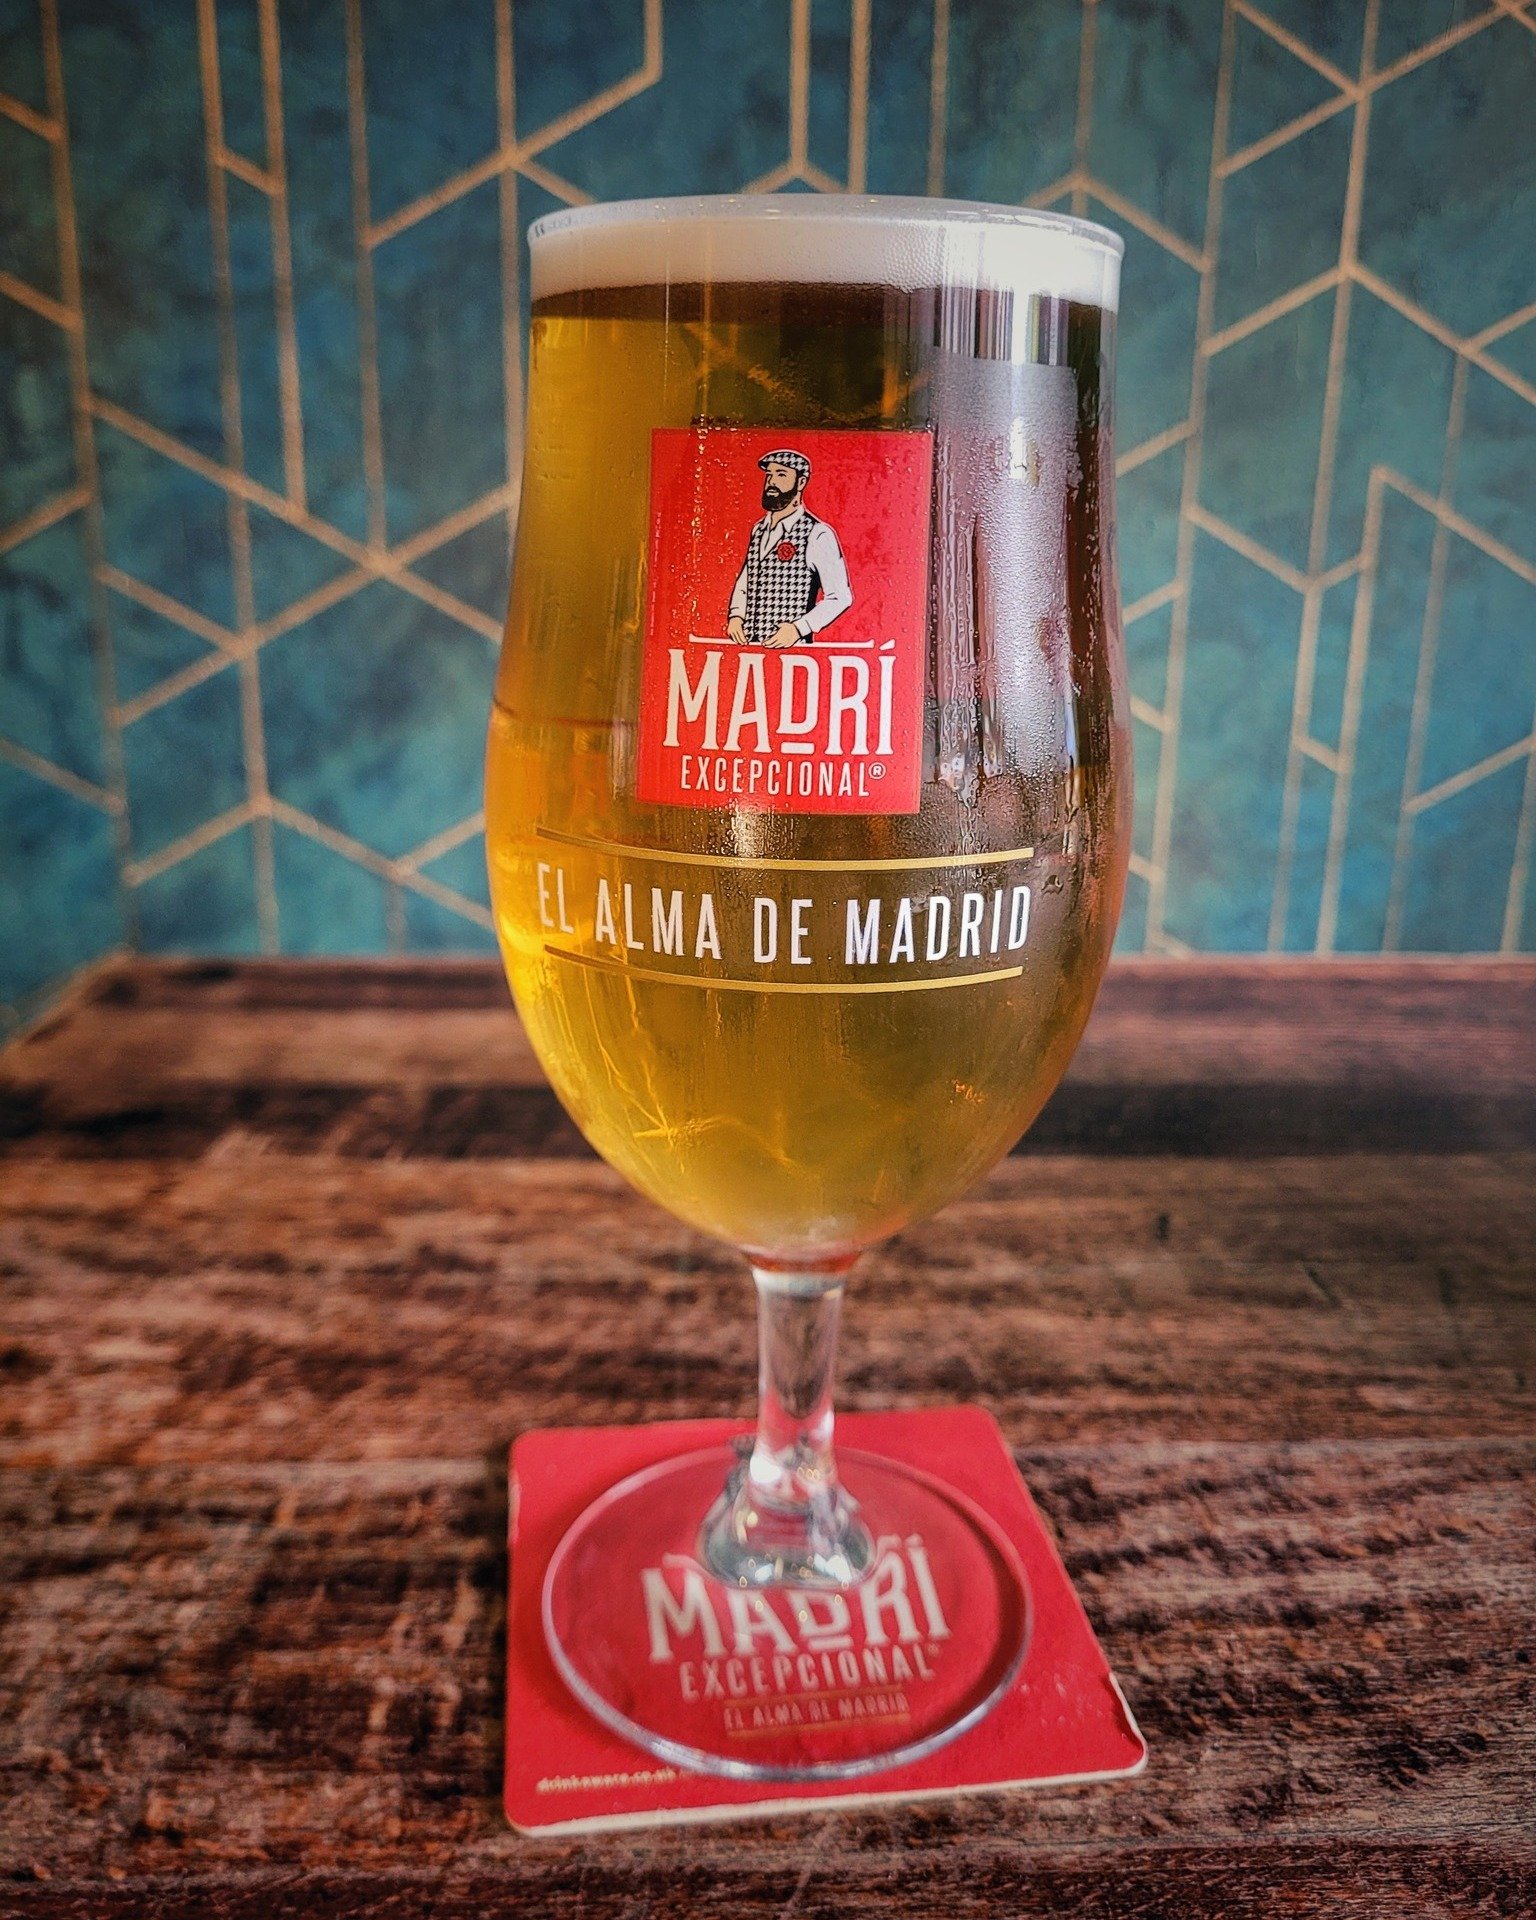 You fine people of Boro certainly love a cold glass of Madri. It is one of many cold drinks on offer here at 176. Why not pop by on this glorious Saturday for a refreshing lager?

#beer #boropub #refreshingdrinks #176barandkitchen